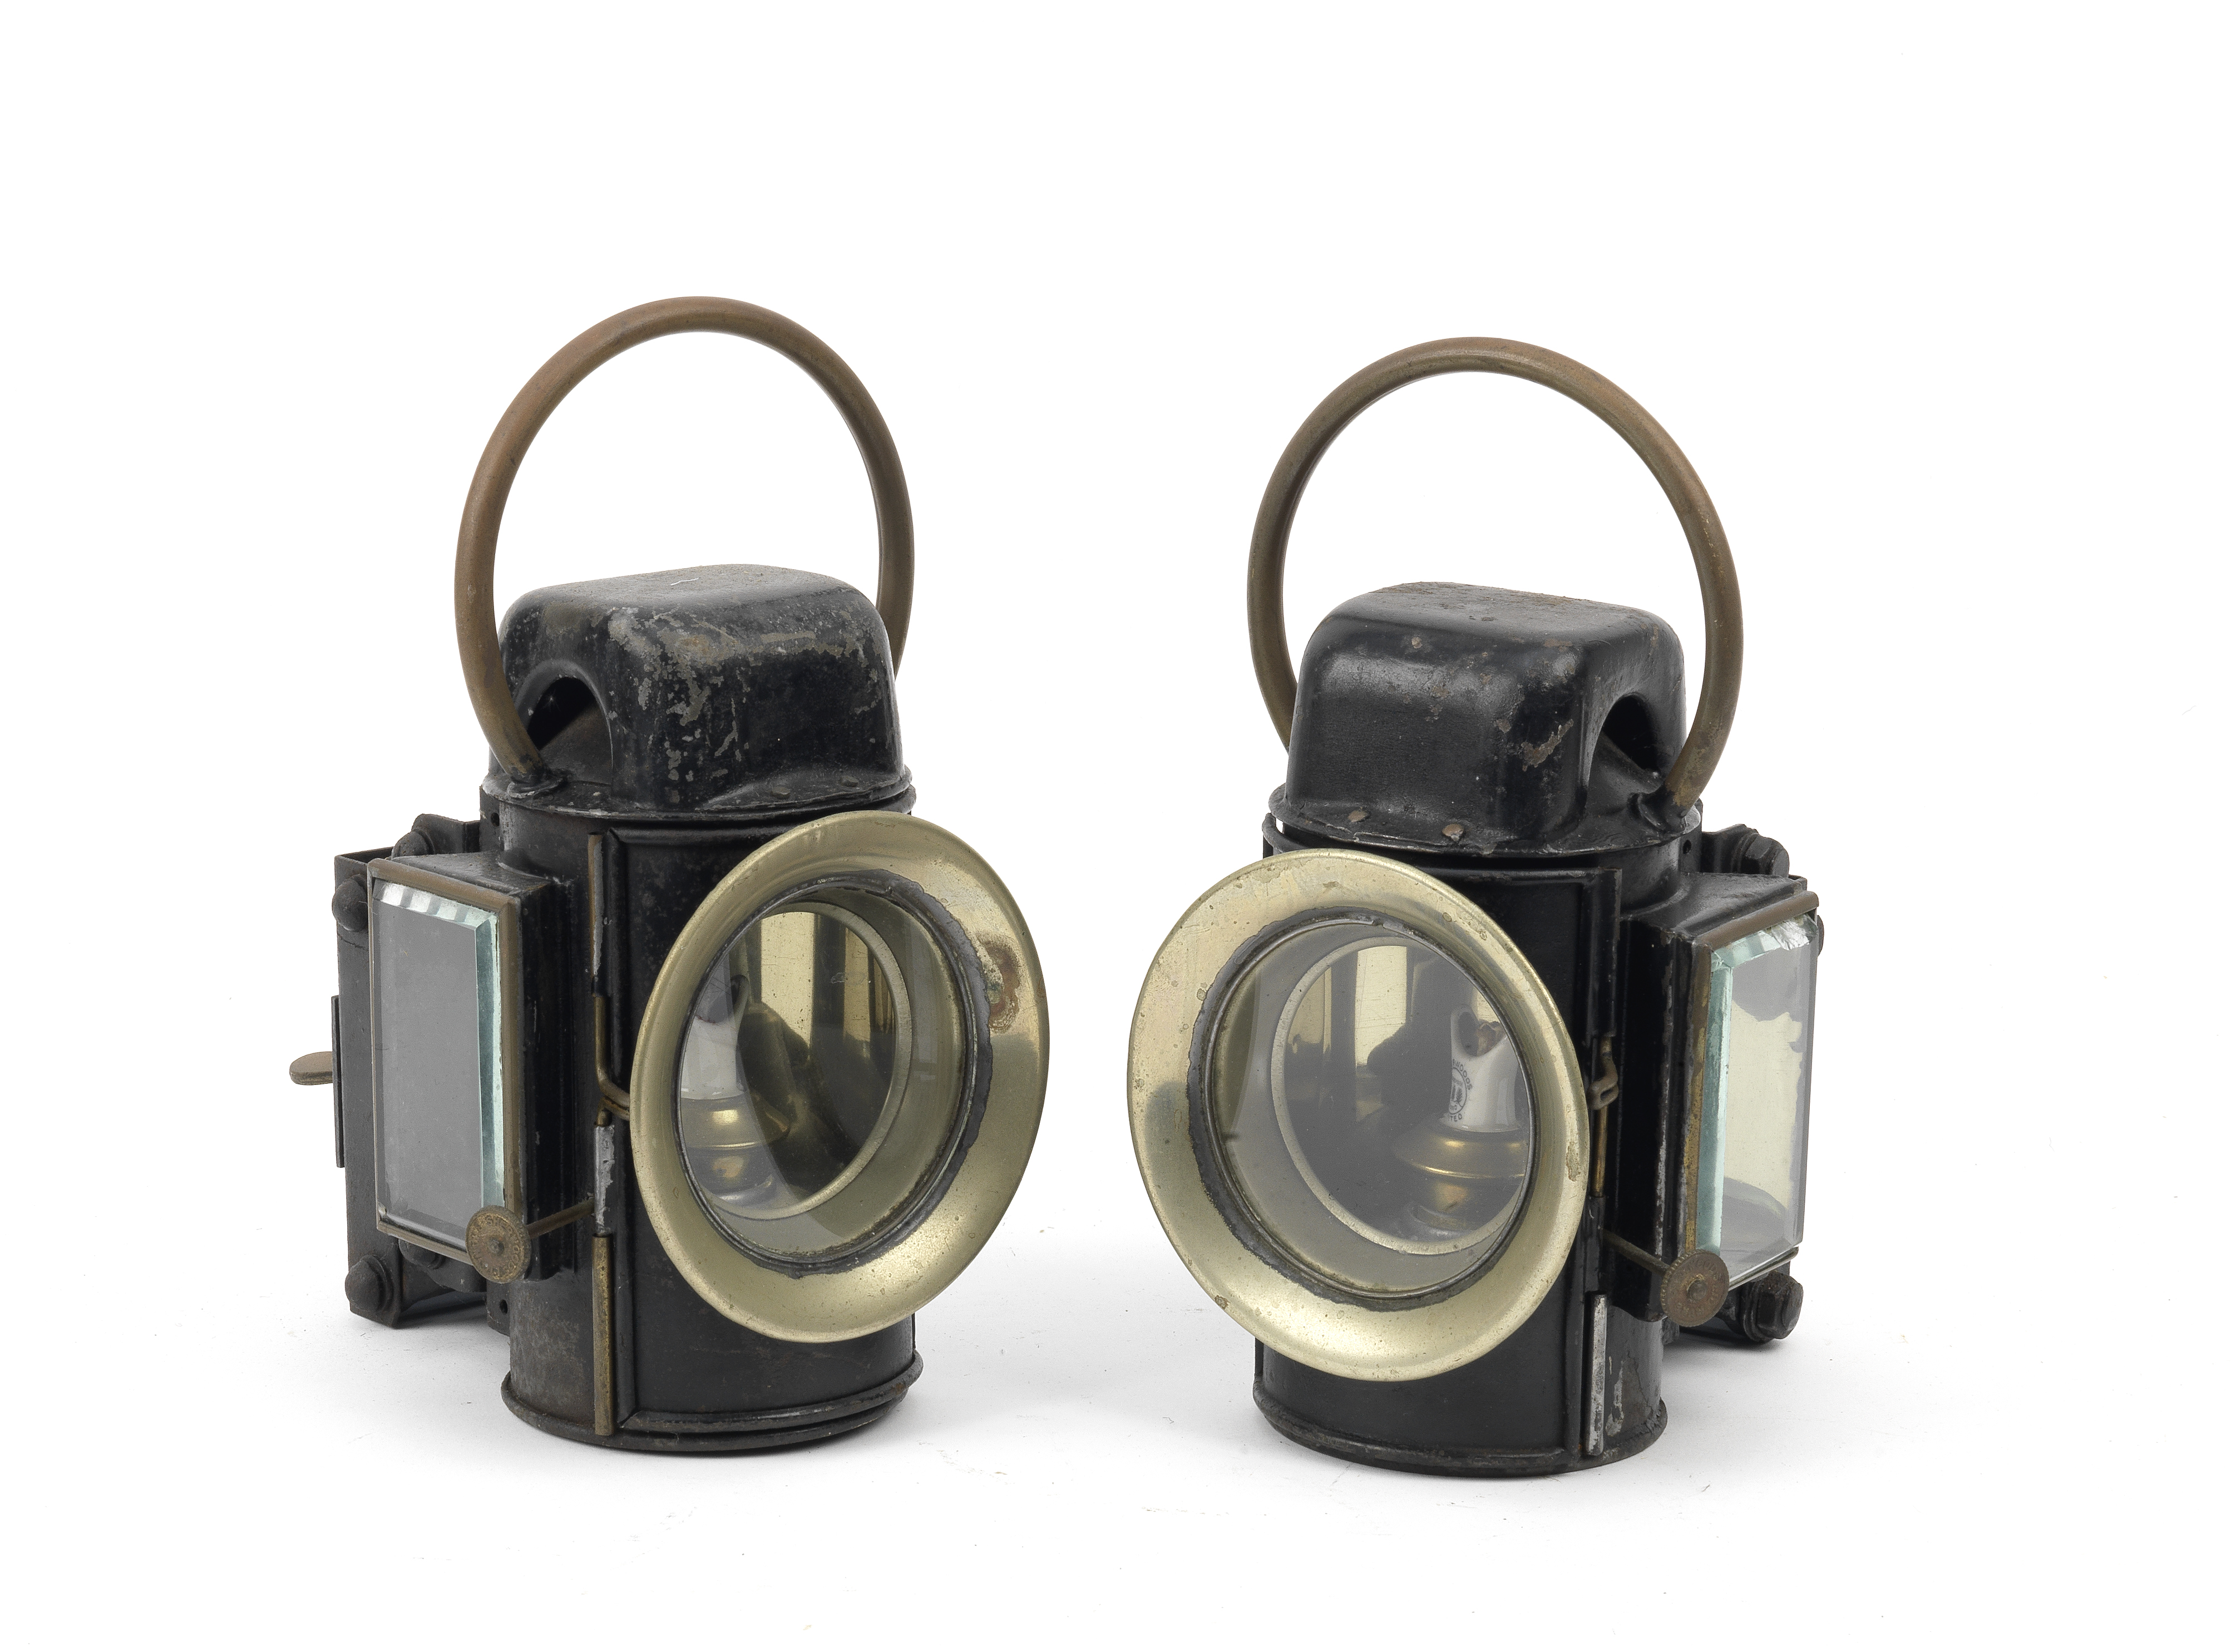 A pair of traction engine/commercial vehicle oil-illuminating side-lamps, by Sherwood Ltd, 1920s...